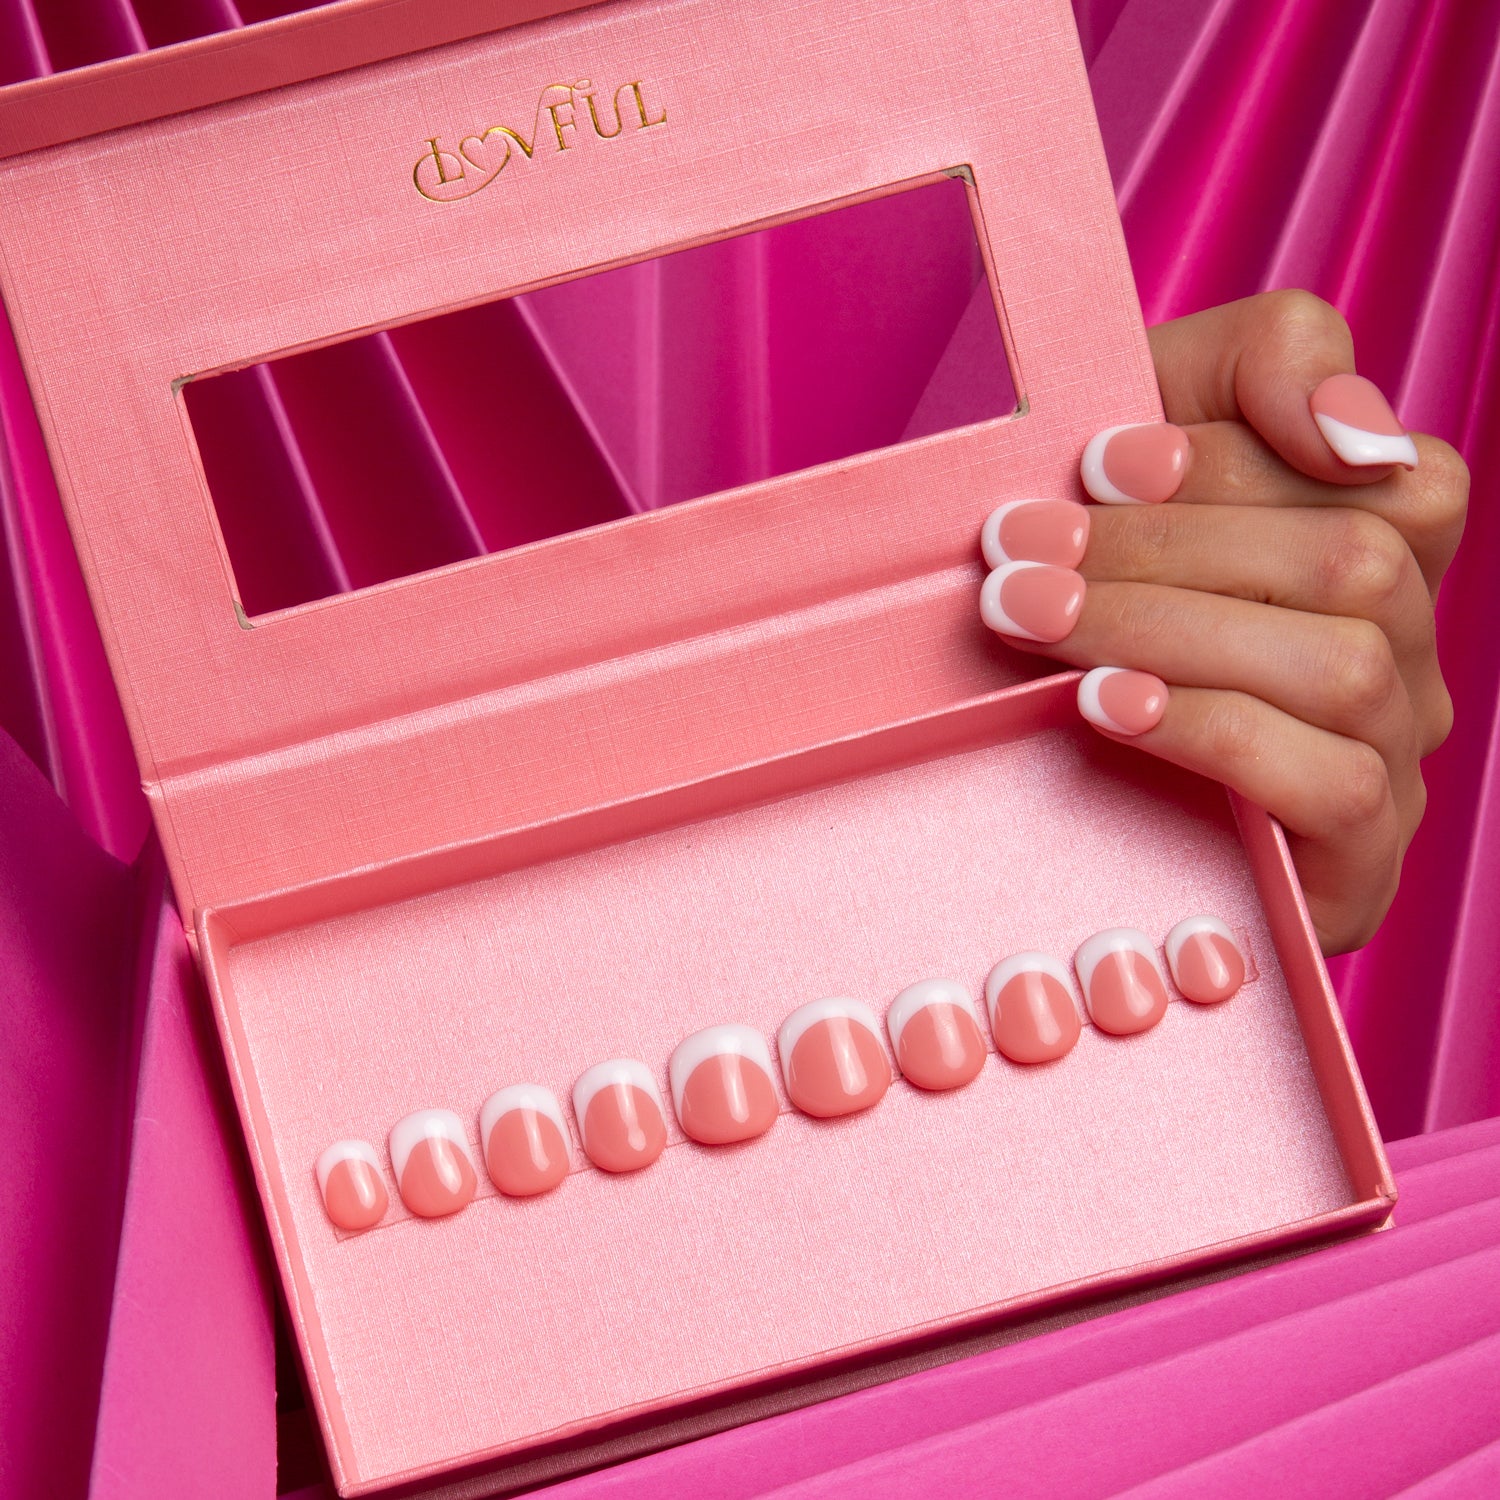 Lovful Coffee Latte French Tip Press-On Nails in a pink box with ten square-shaped nails, showcasing a sophisticated white and coffee latte design. Ideal for stylish occasions.